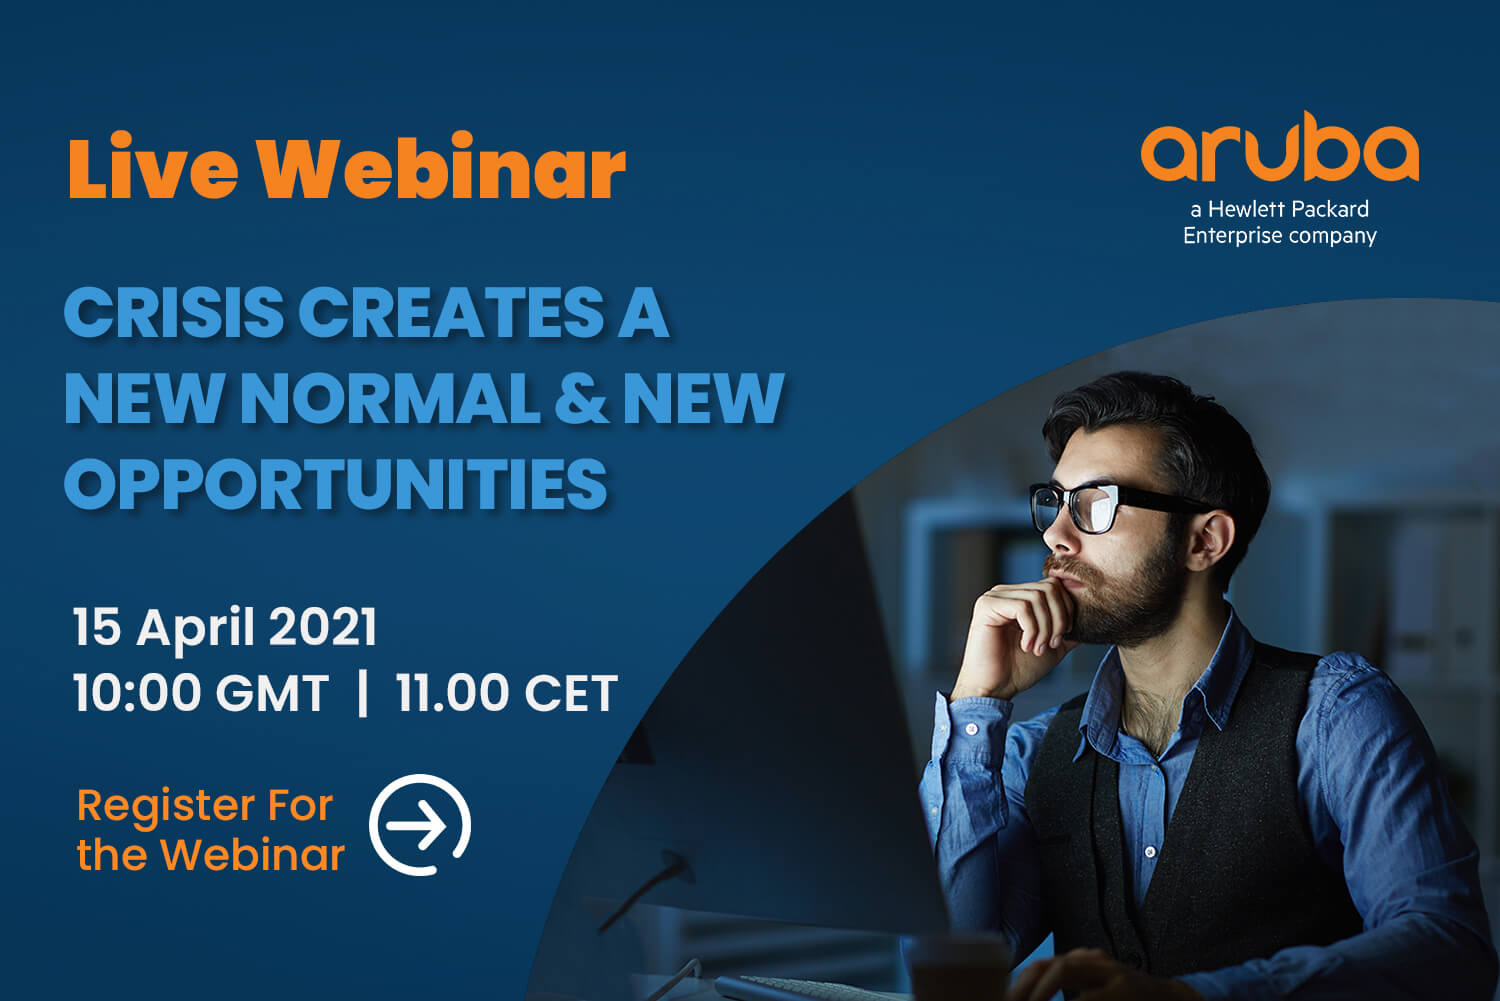 WEBINAR: CRISIS CREATES A NEW NORMAL & NEW OPPORTUNITIES